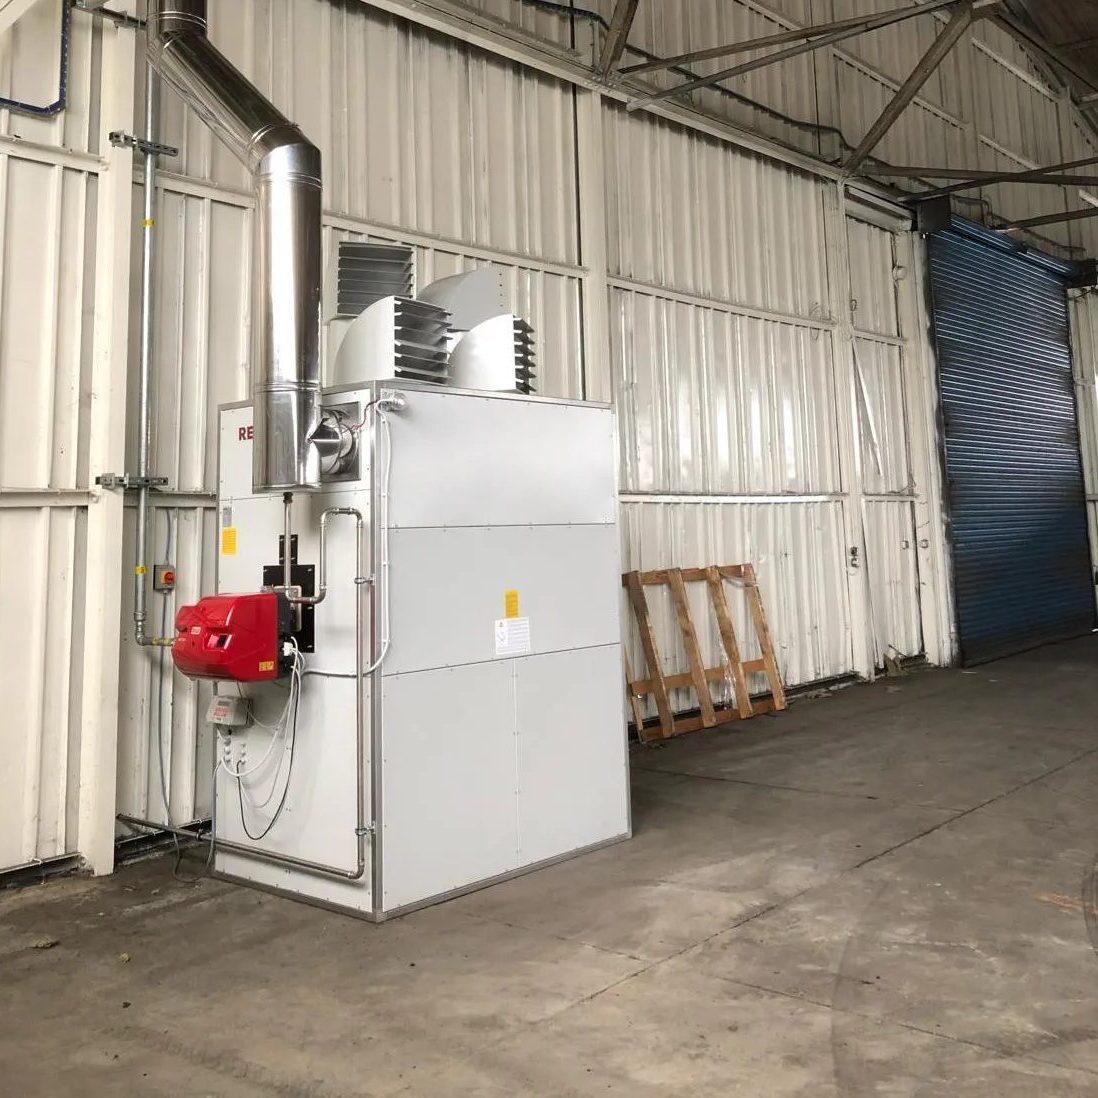 Cabinet heater installation in a warehouse